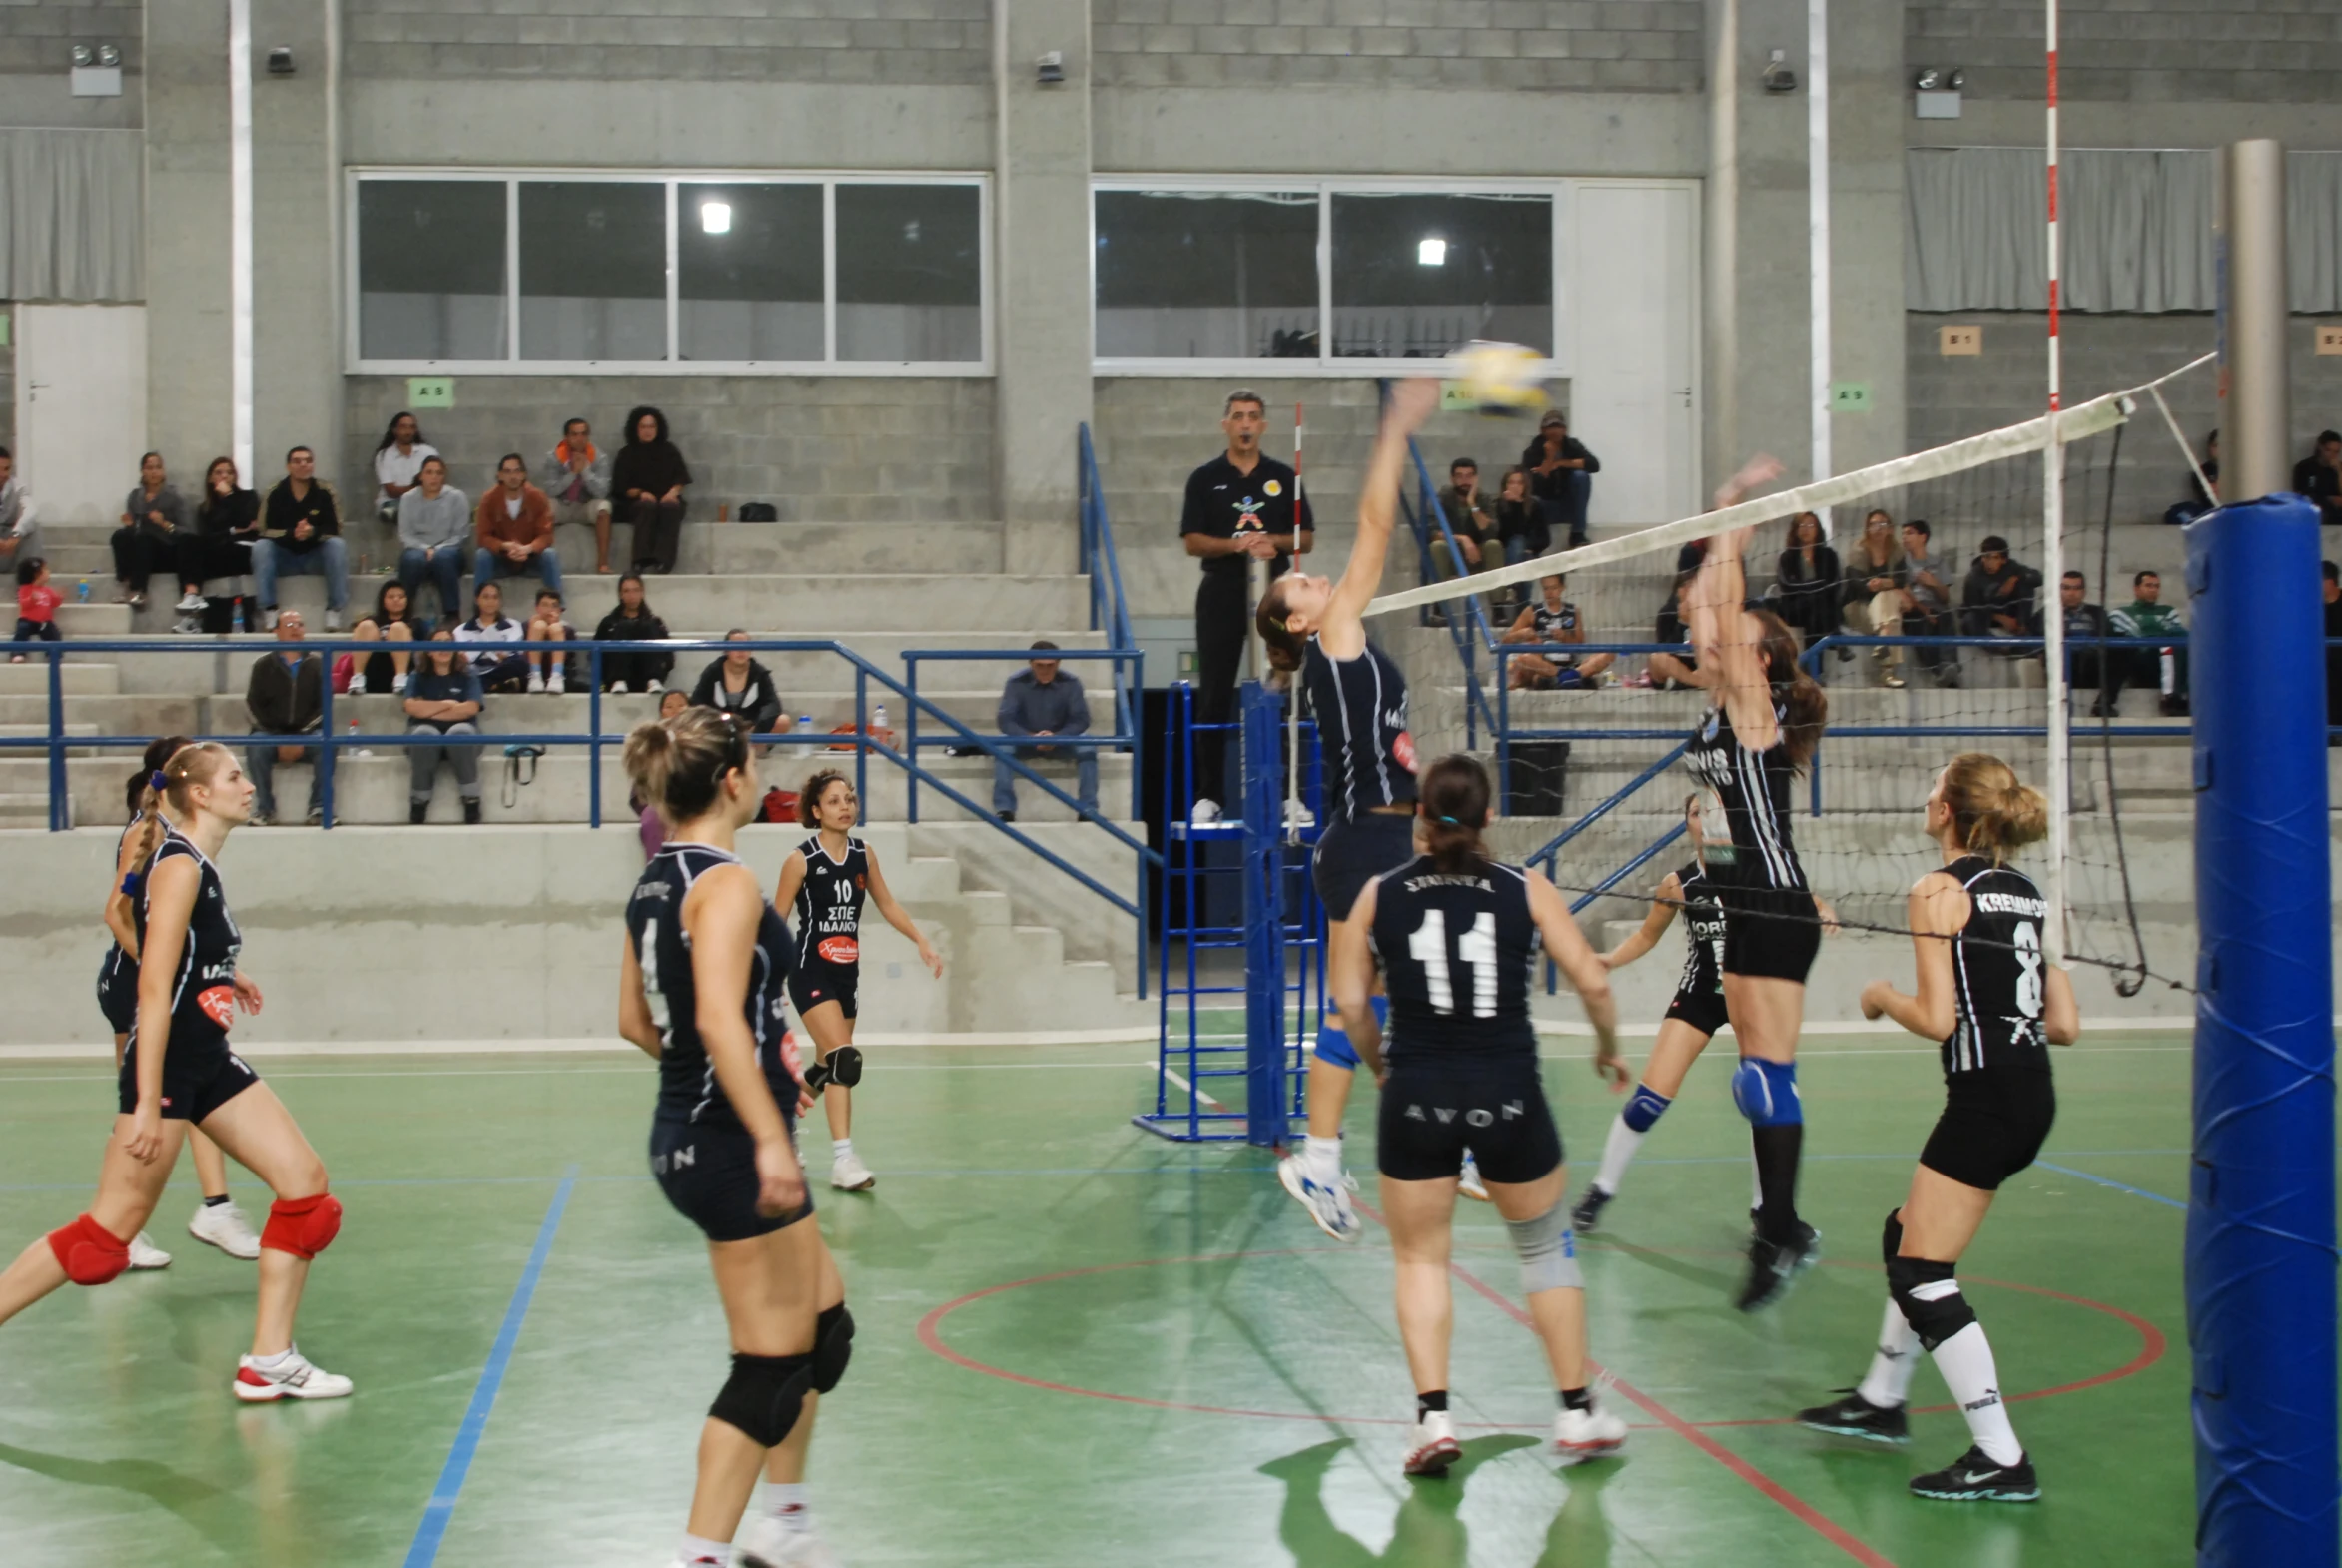 women in black uniforms playing volleyball against a crowd